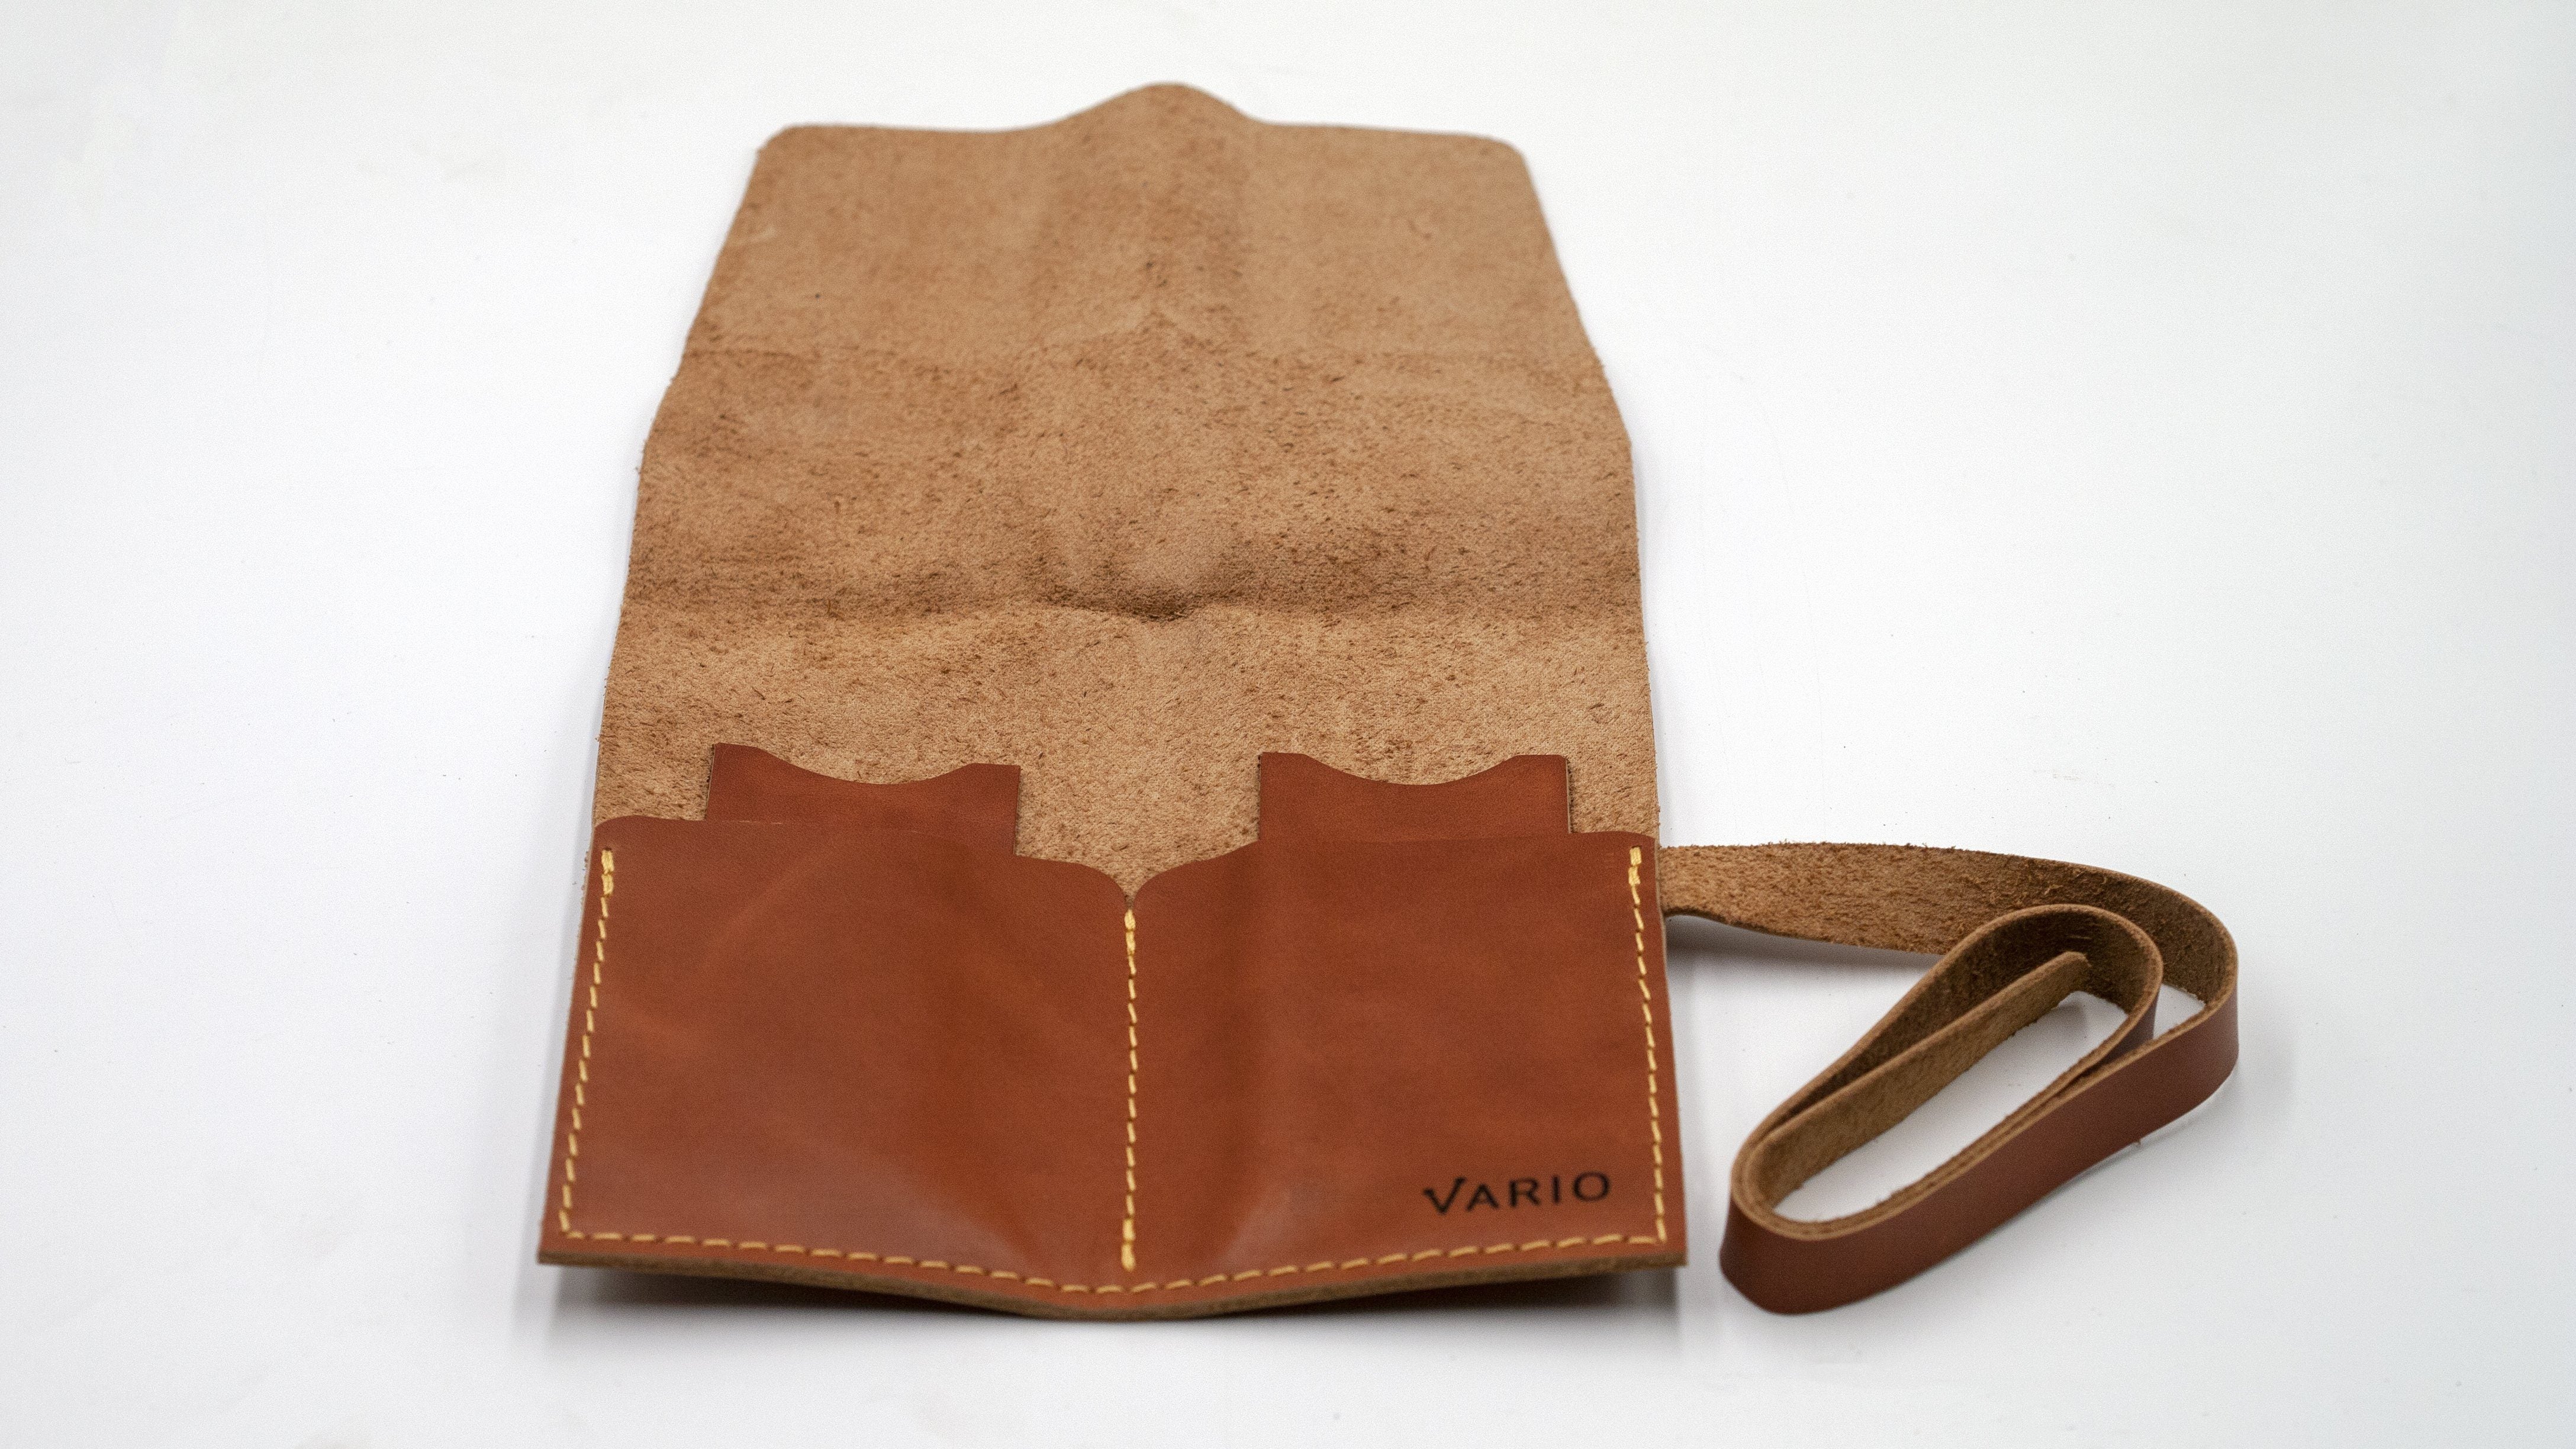 vario caramel brown leather 2 pocket watch roll fully opened